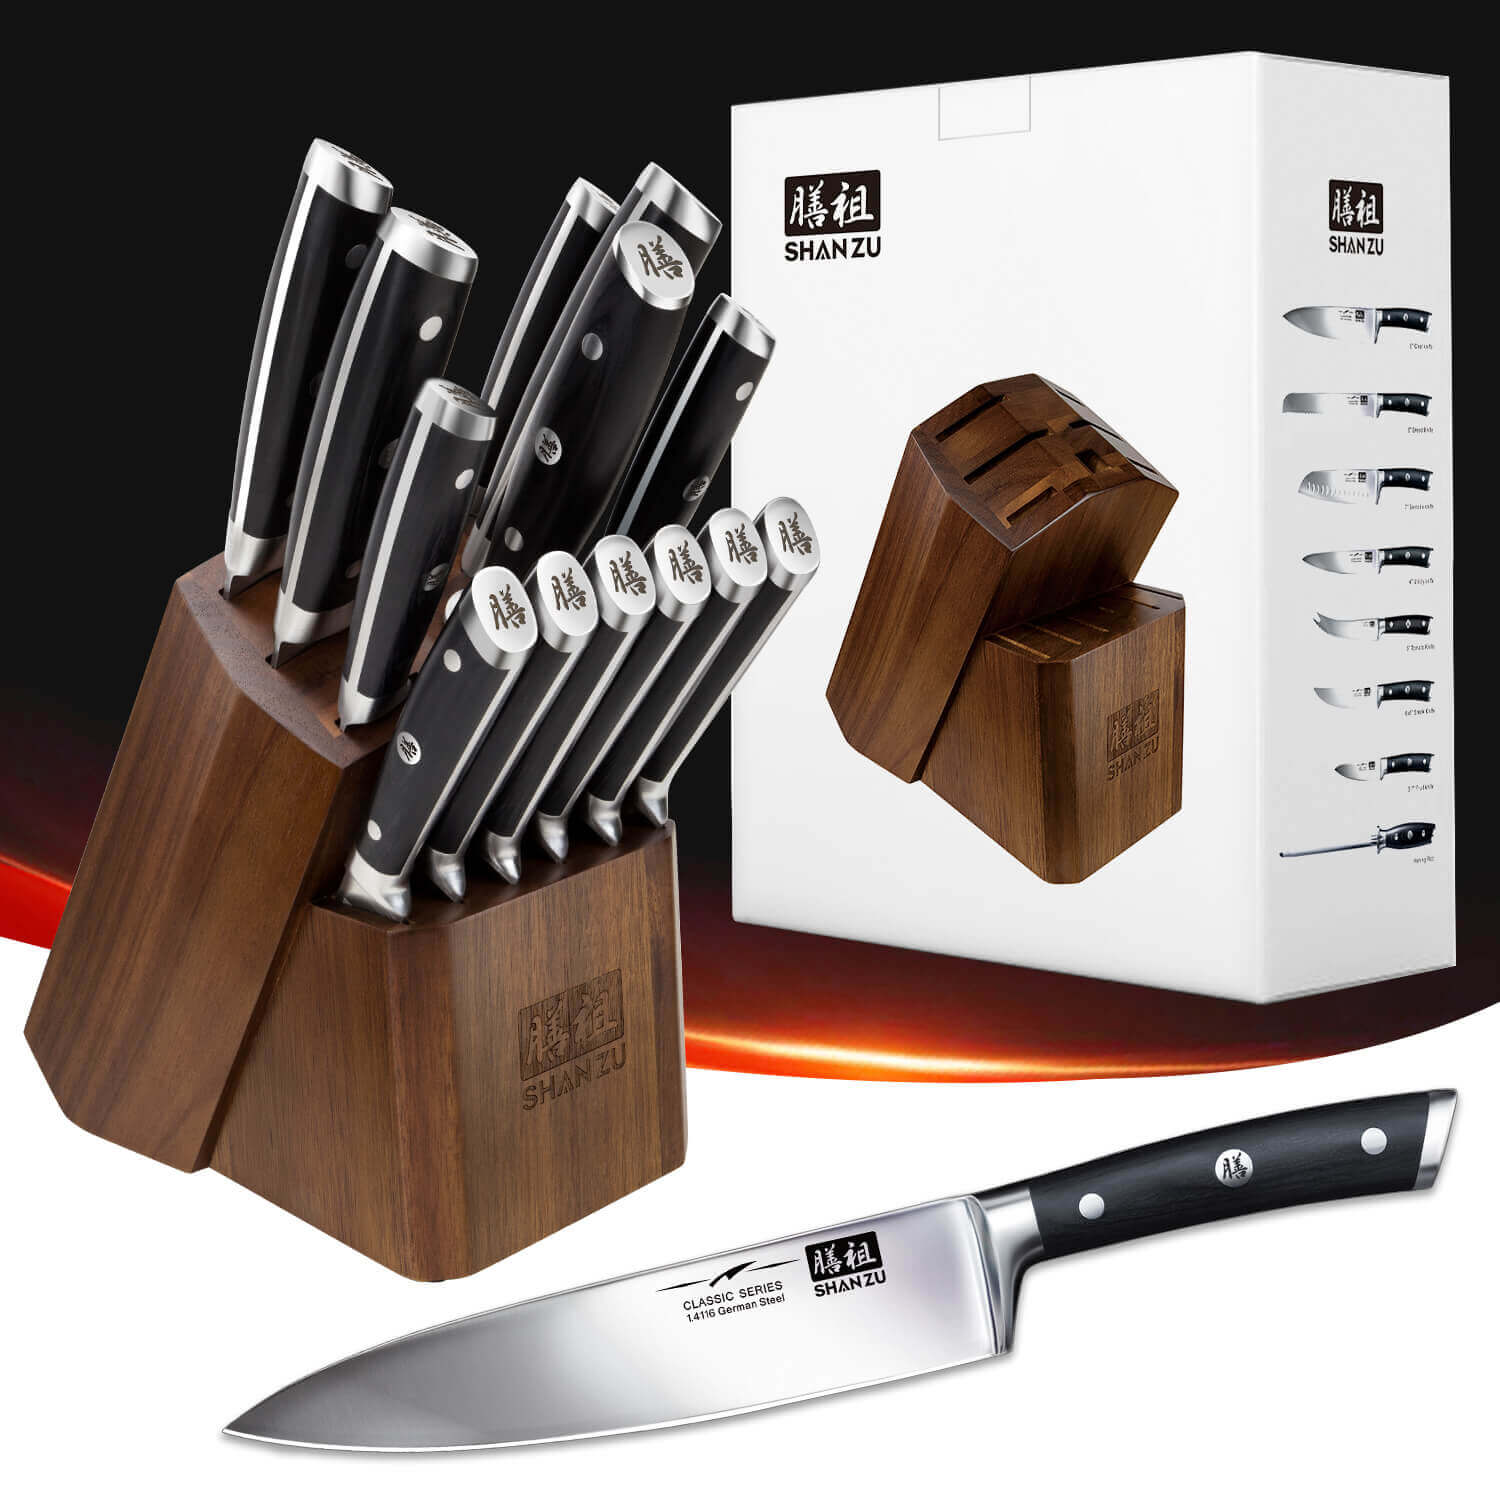 ANTINIVES Black Knife Block Sets, 14 Pcs German Stainless Steel Knife Sets  for Kitchen with Block, Kitchen Knife Sets with Built-in Sharpener